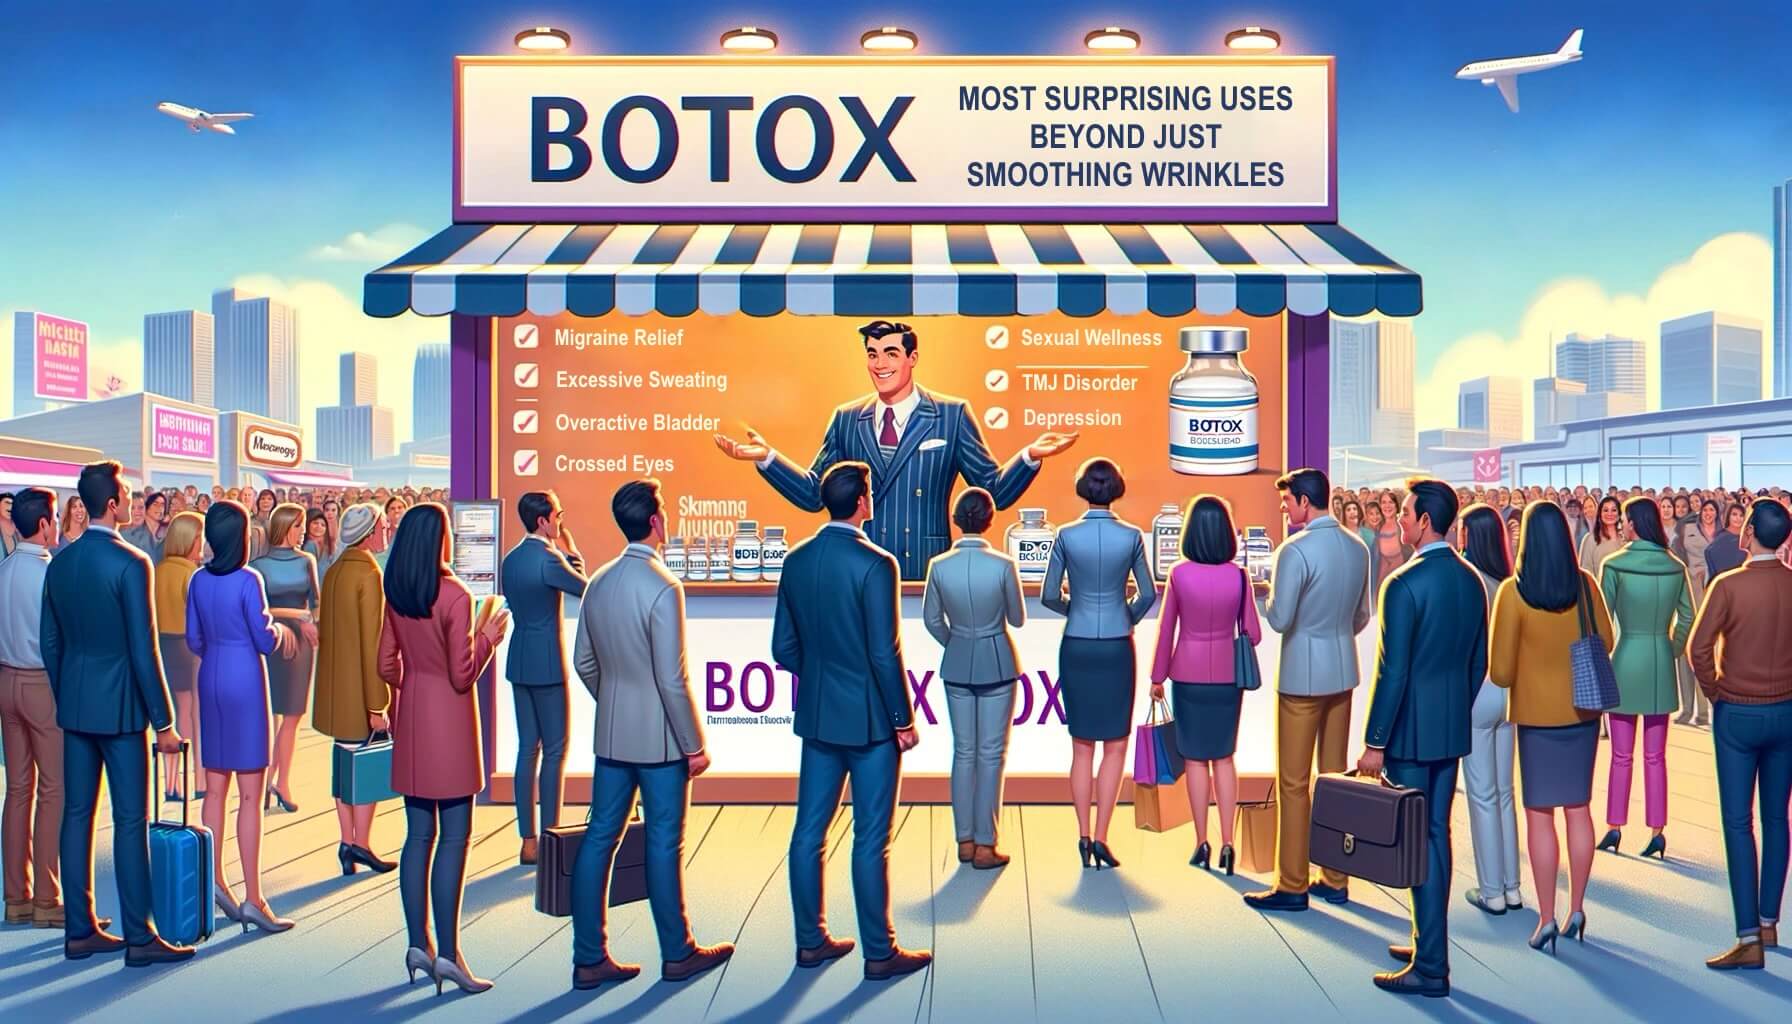 Illustration of salesman explaining the Most Surprising Uses for Botox Beyond Just Smoothing Wrinkles